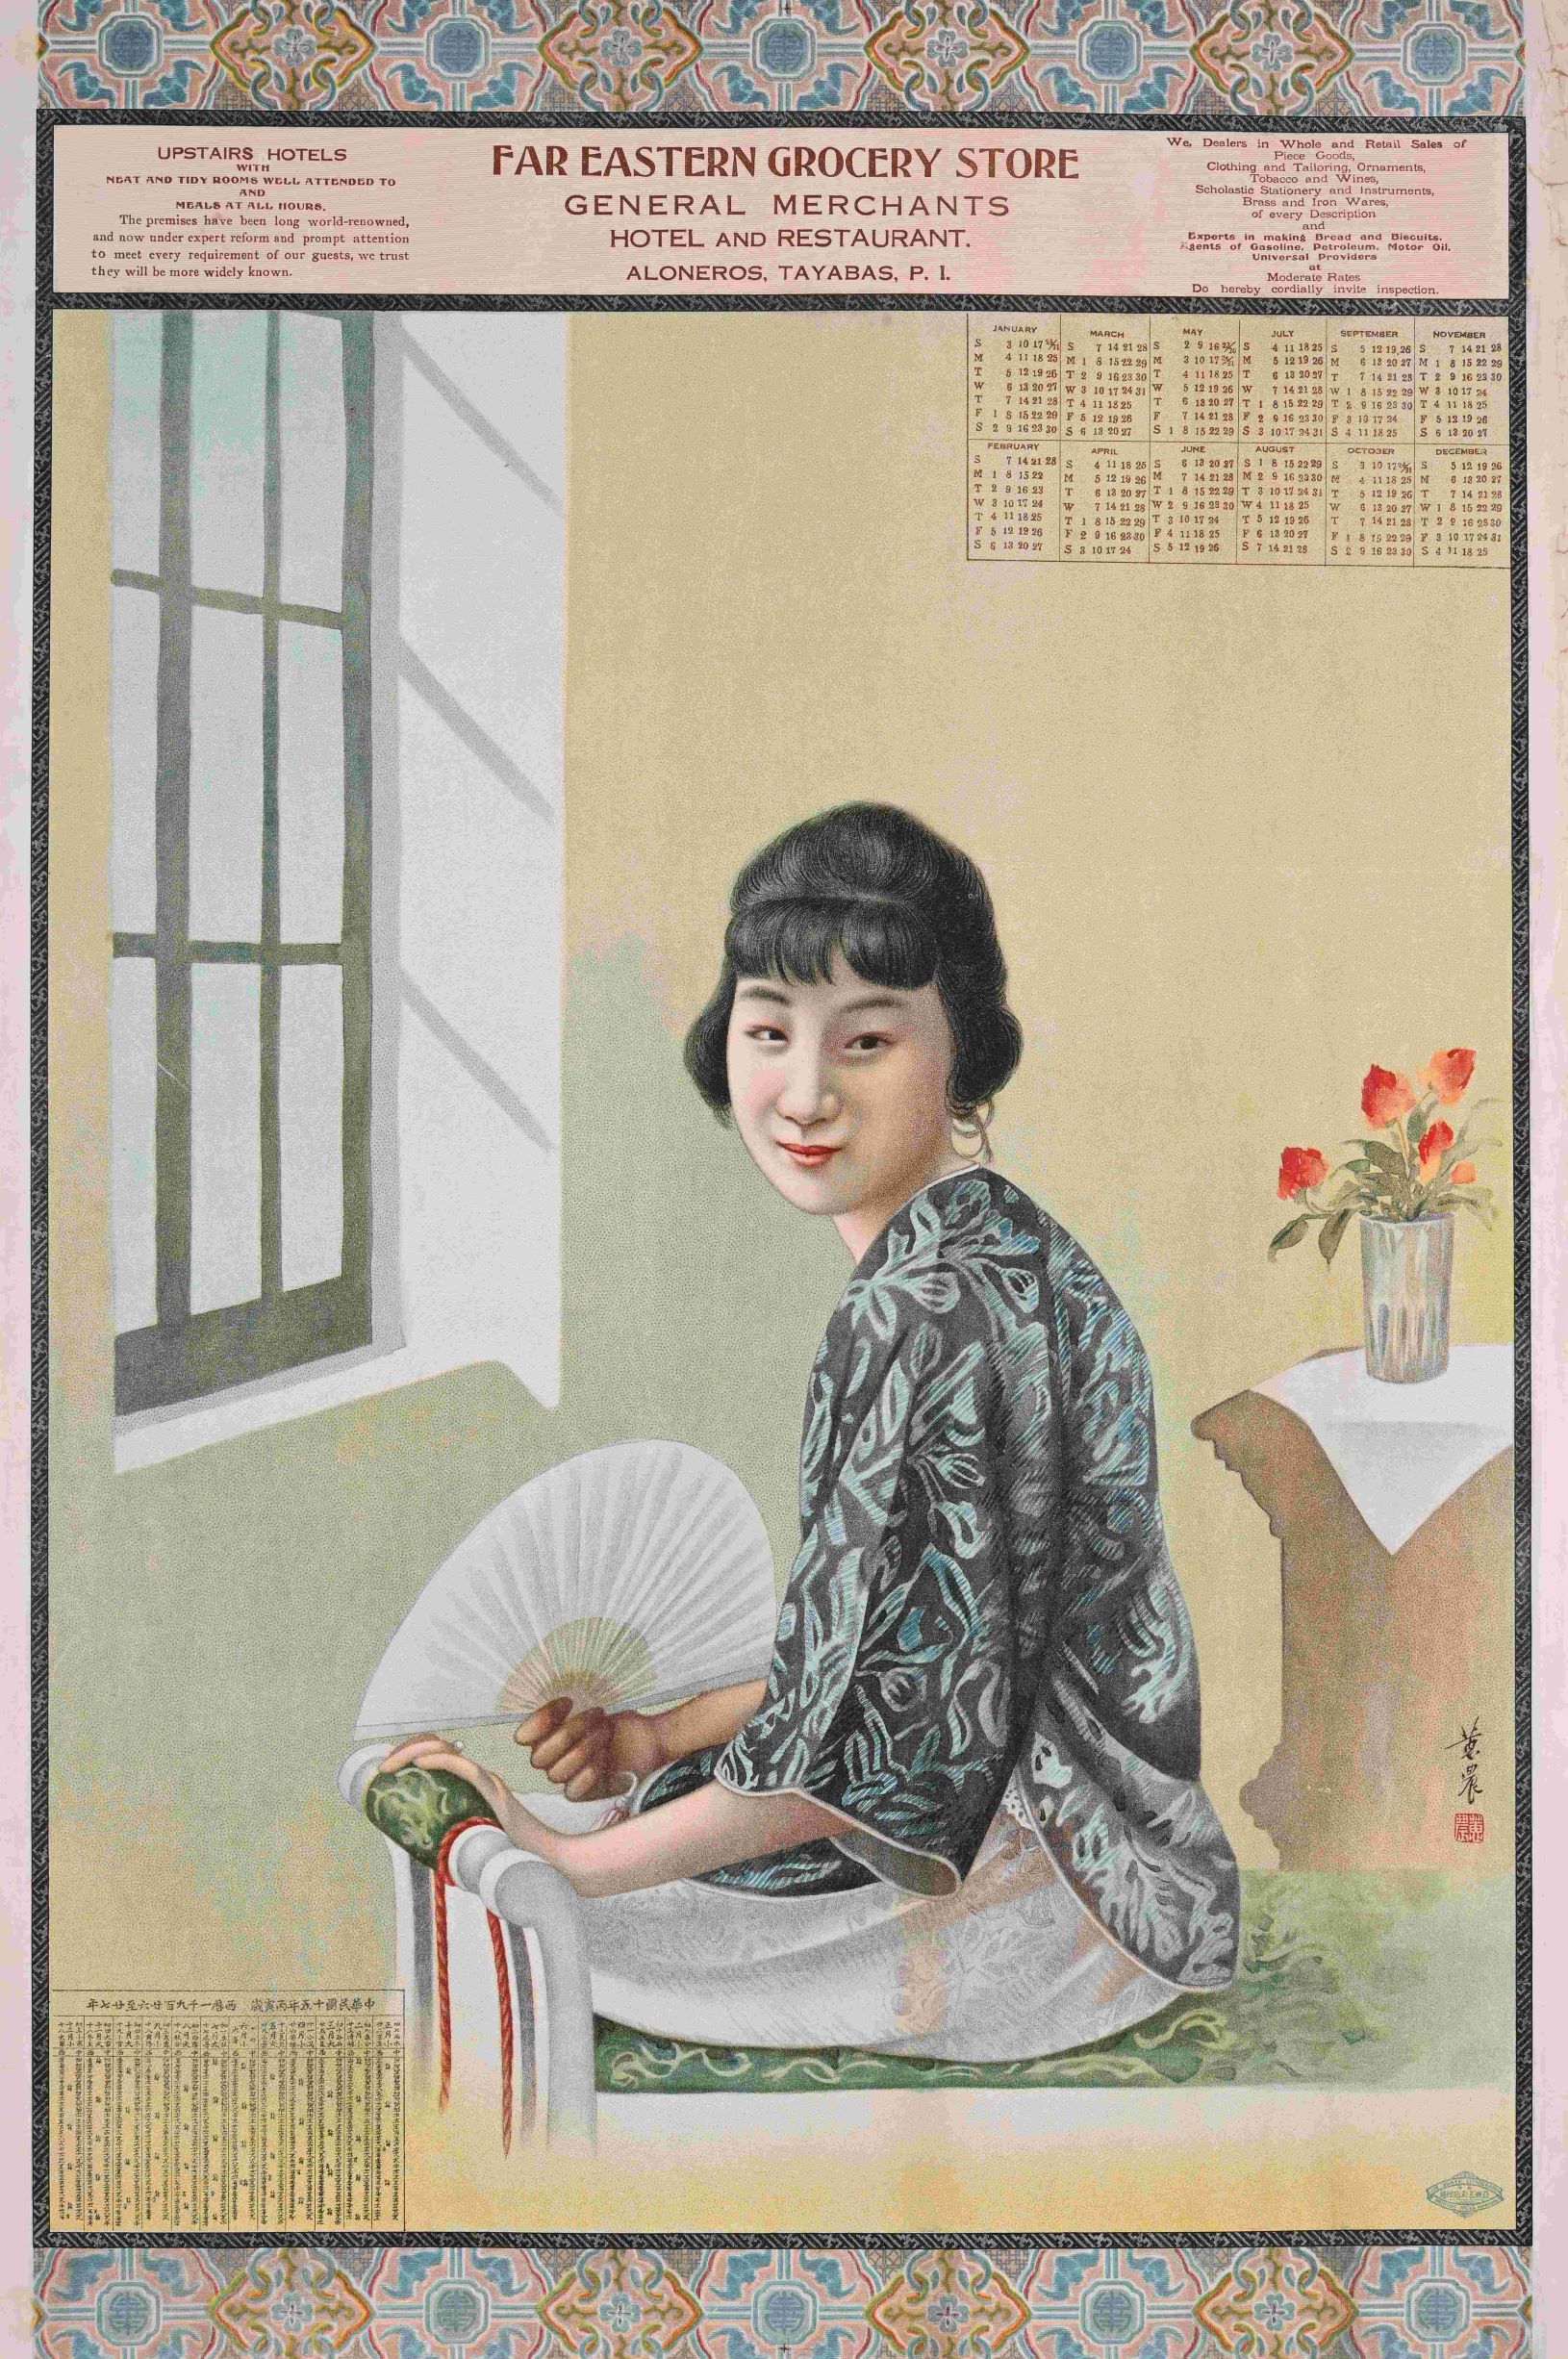 This chromolithographic poster, titled Far Eastern Grocery Store, was printed by the Asiatic Lithographic Printing Press in 1926 